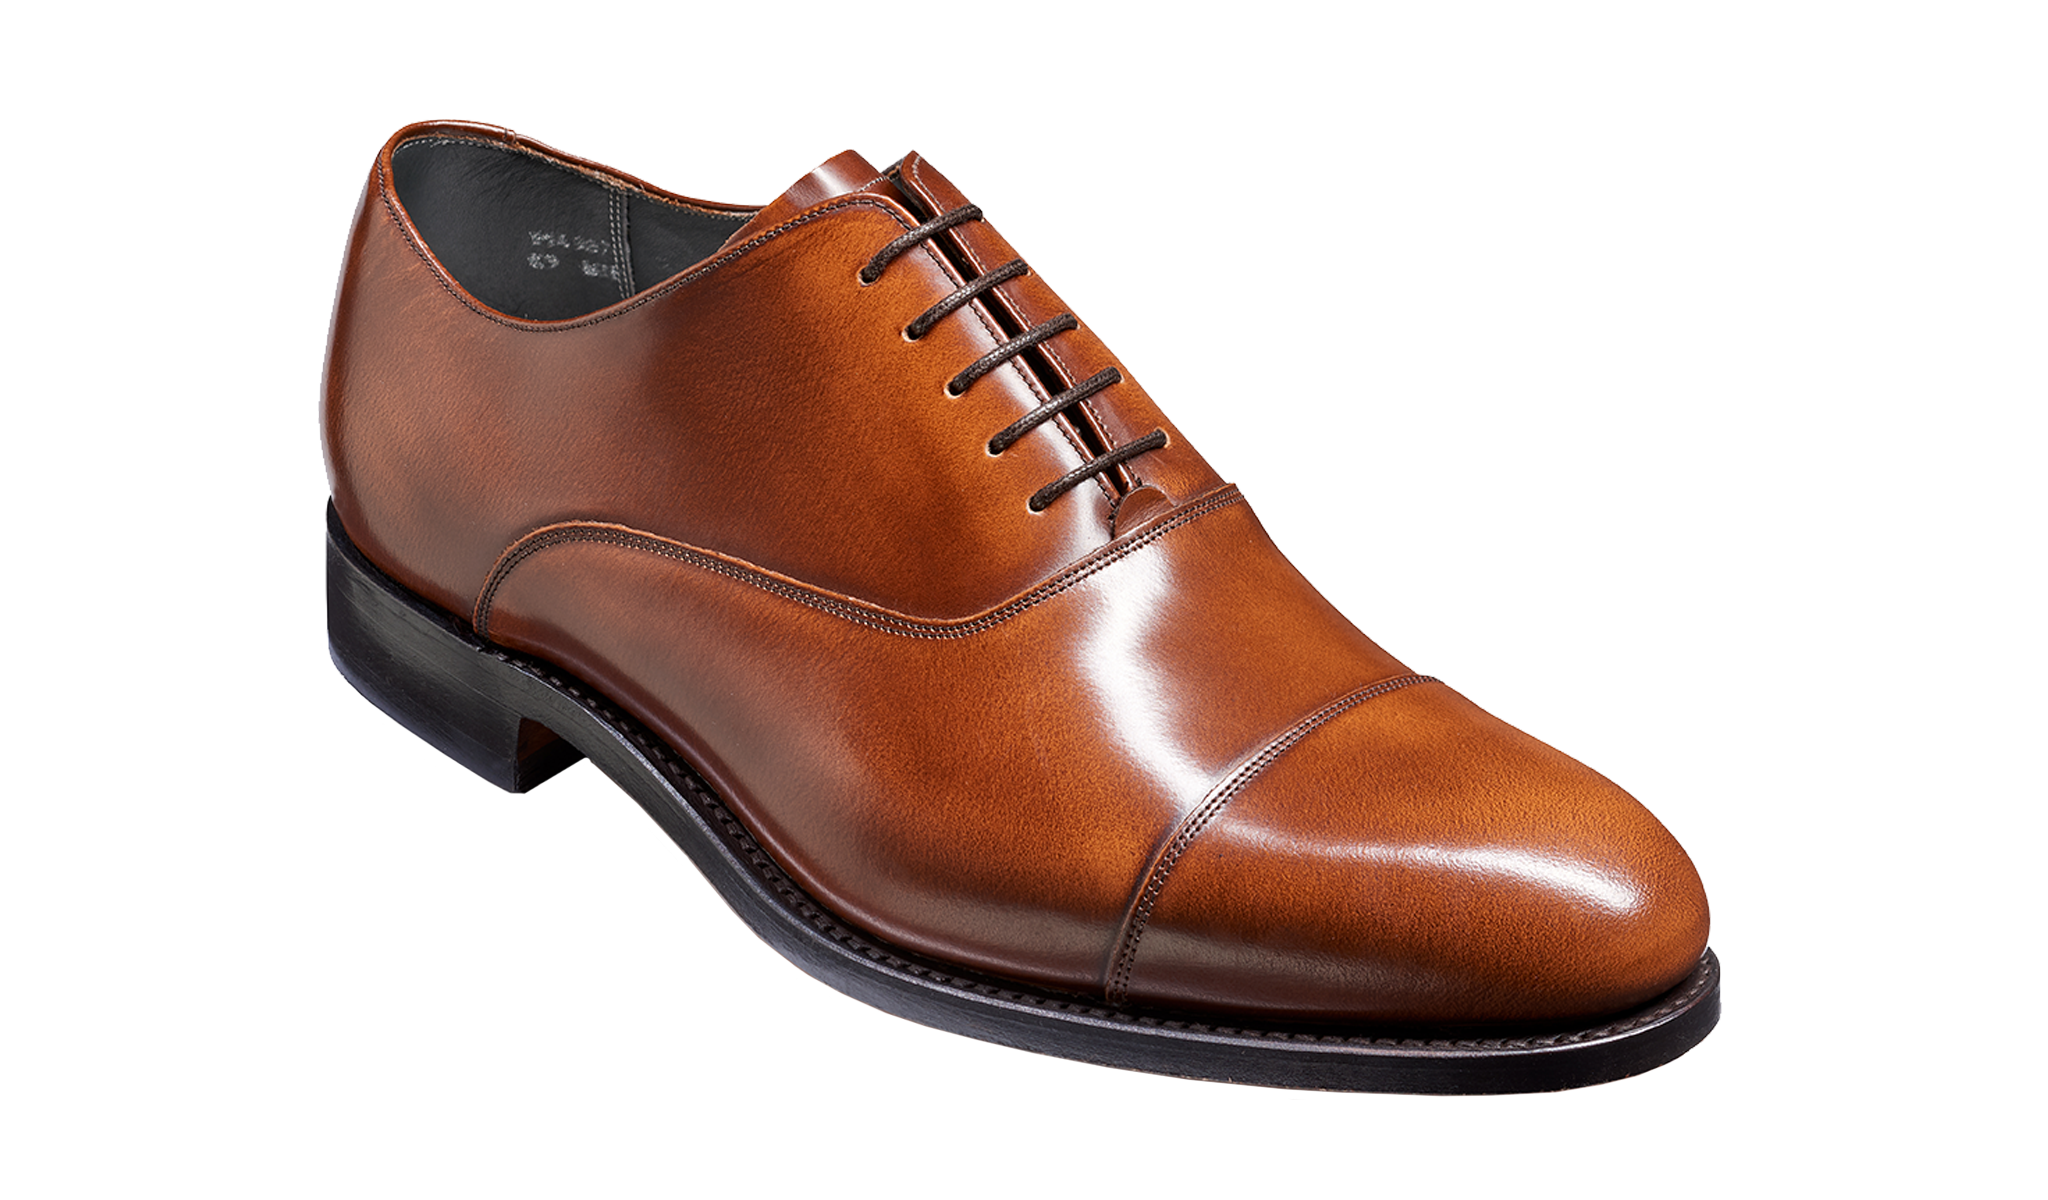 Winsford - Men's Brown Leather Oxford Shoes From Barker